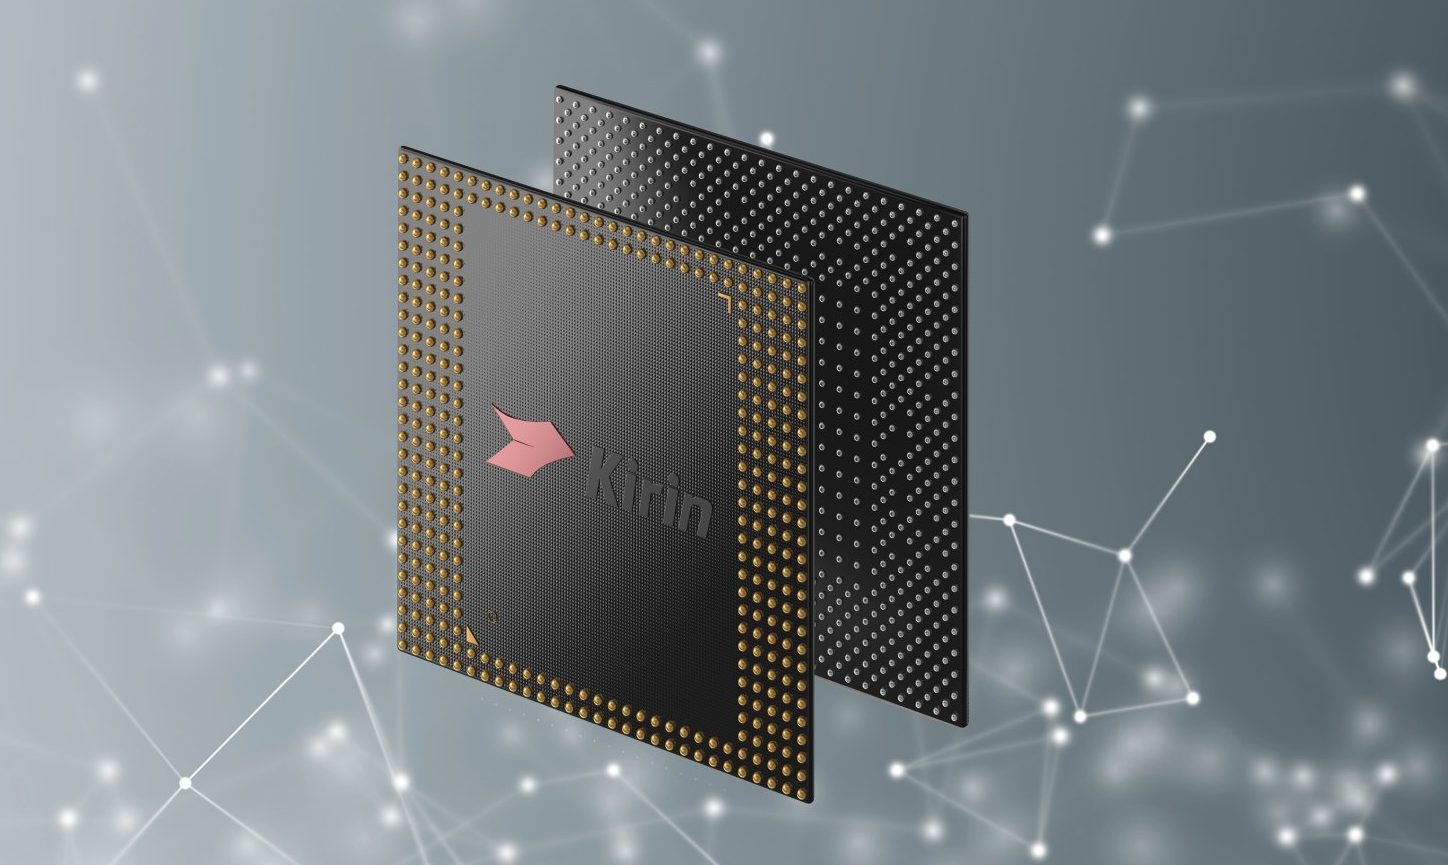 Huawei’s Kirin 985 flagship chipset with increased performance to launch in H2 2019